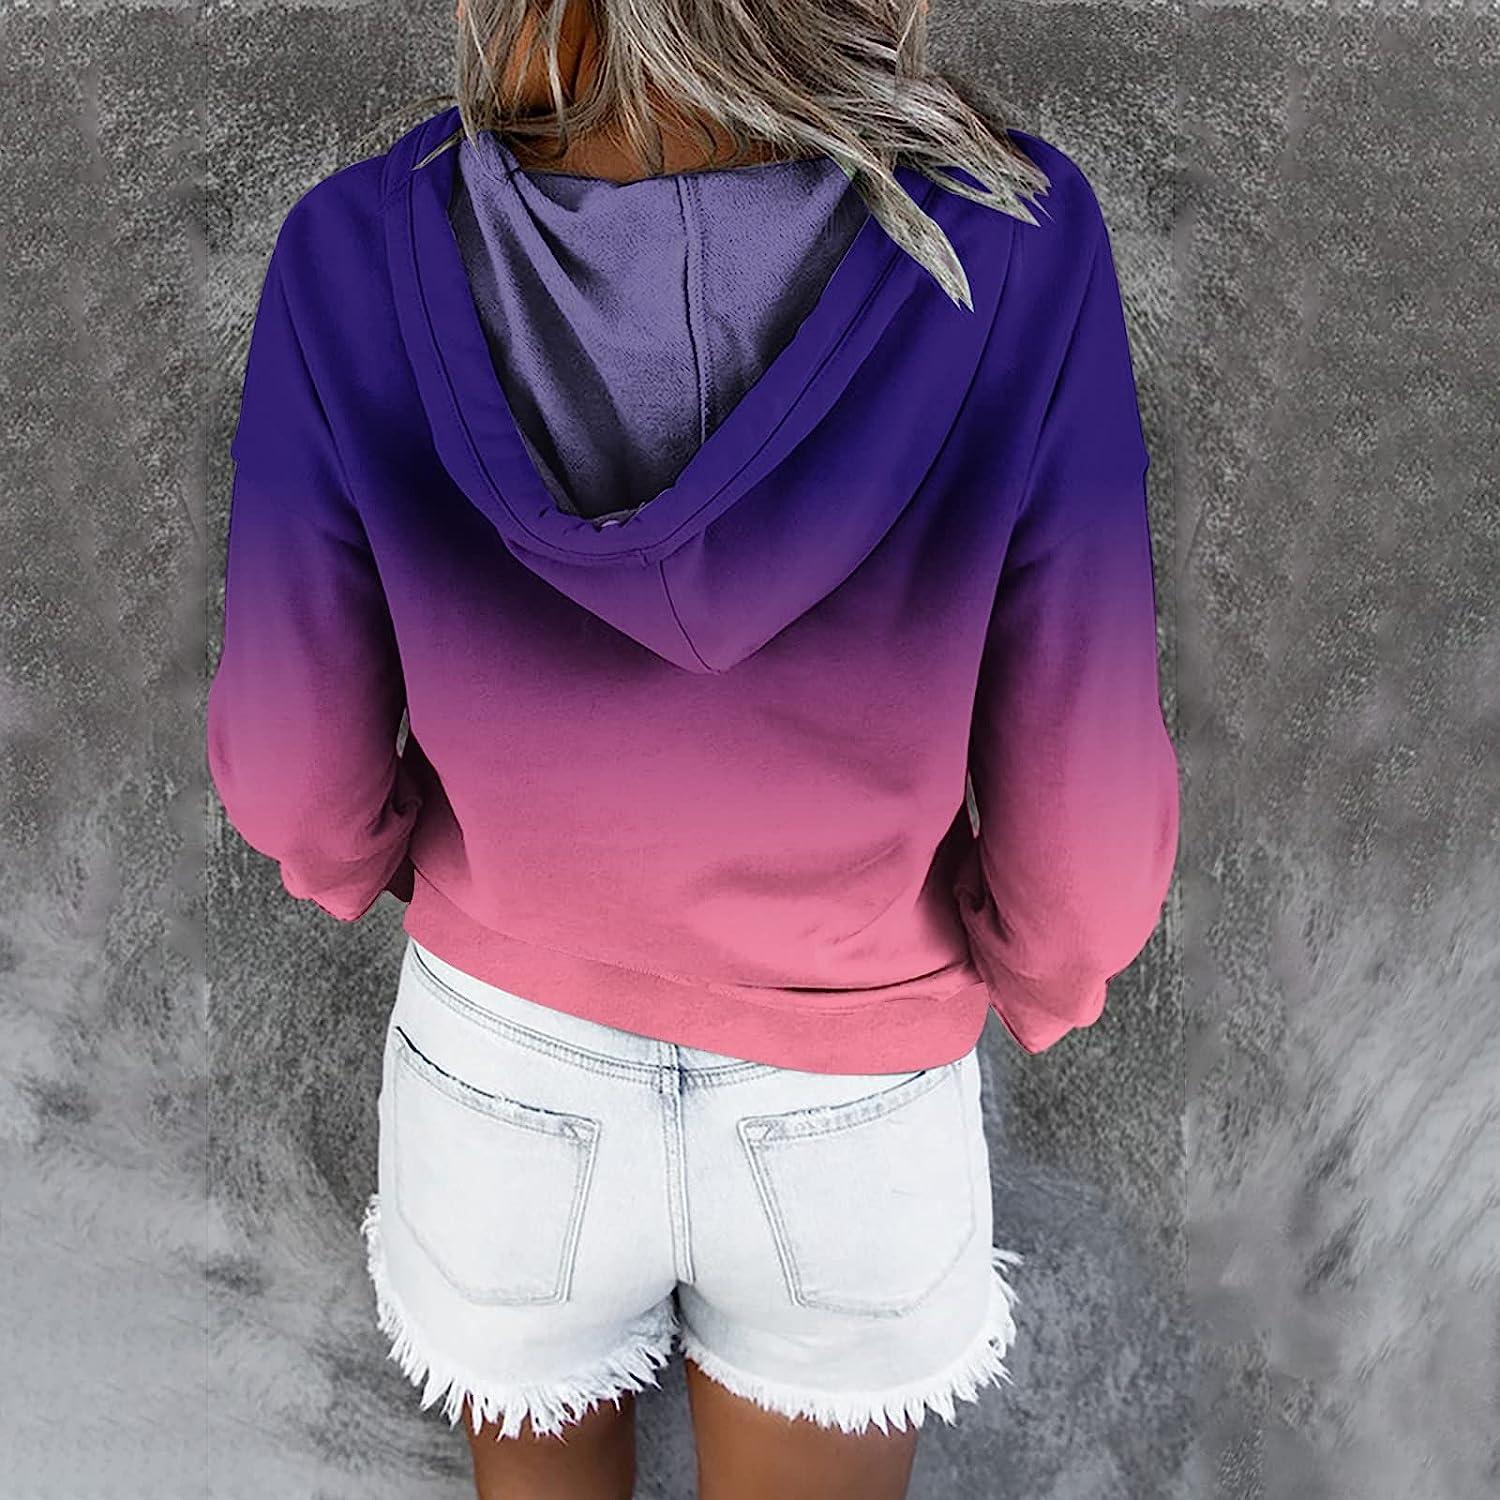 Womens Hoodies Pullover Fall Fashion Tops Graphic Loose Fitting Sweatshirts  Button Down Long Sleeve Shirts with Pocket Medium Purple Button Down Womens  Hoodies Pullover